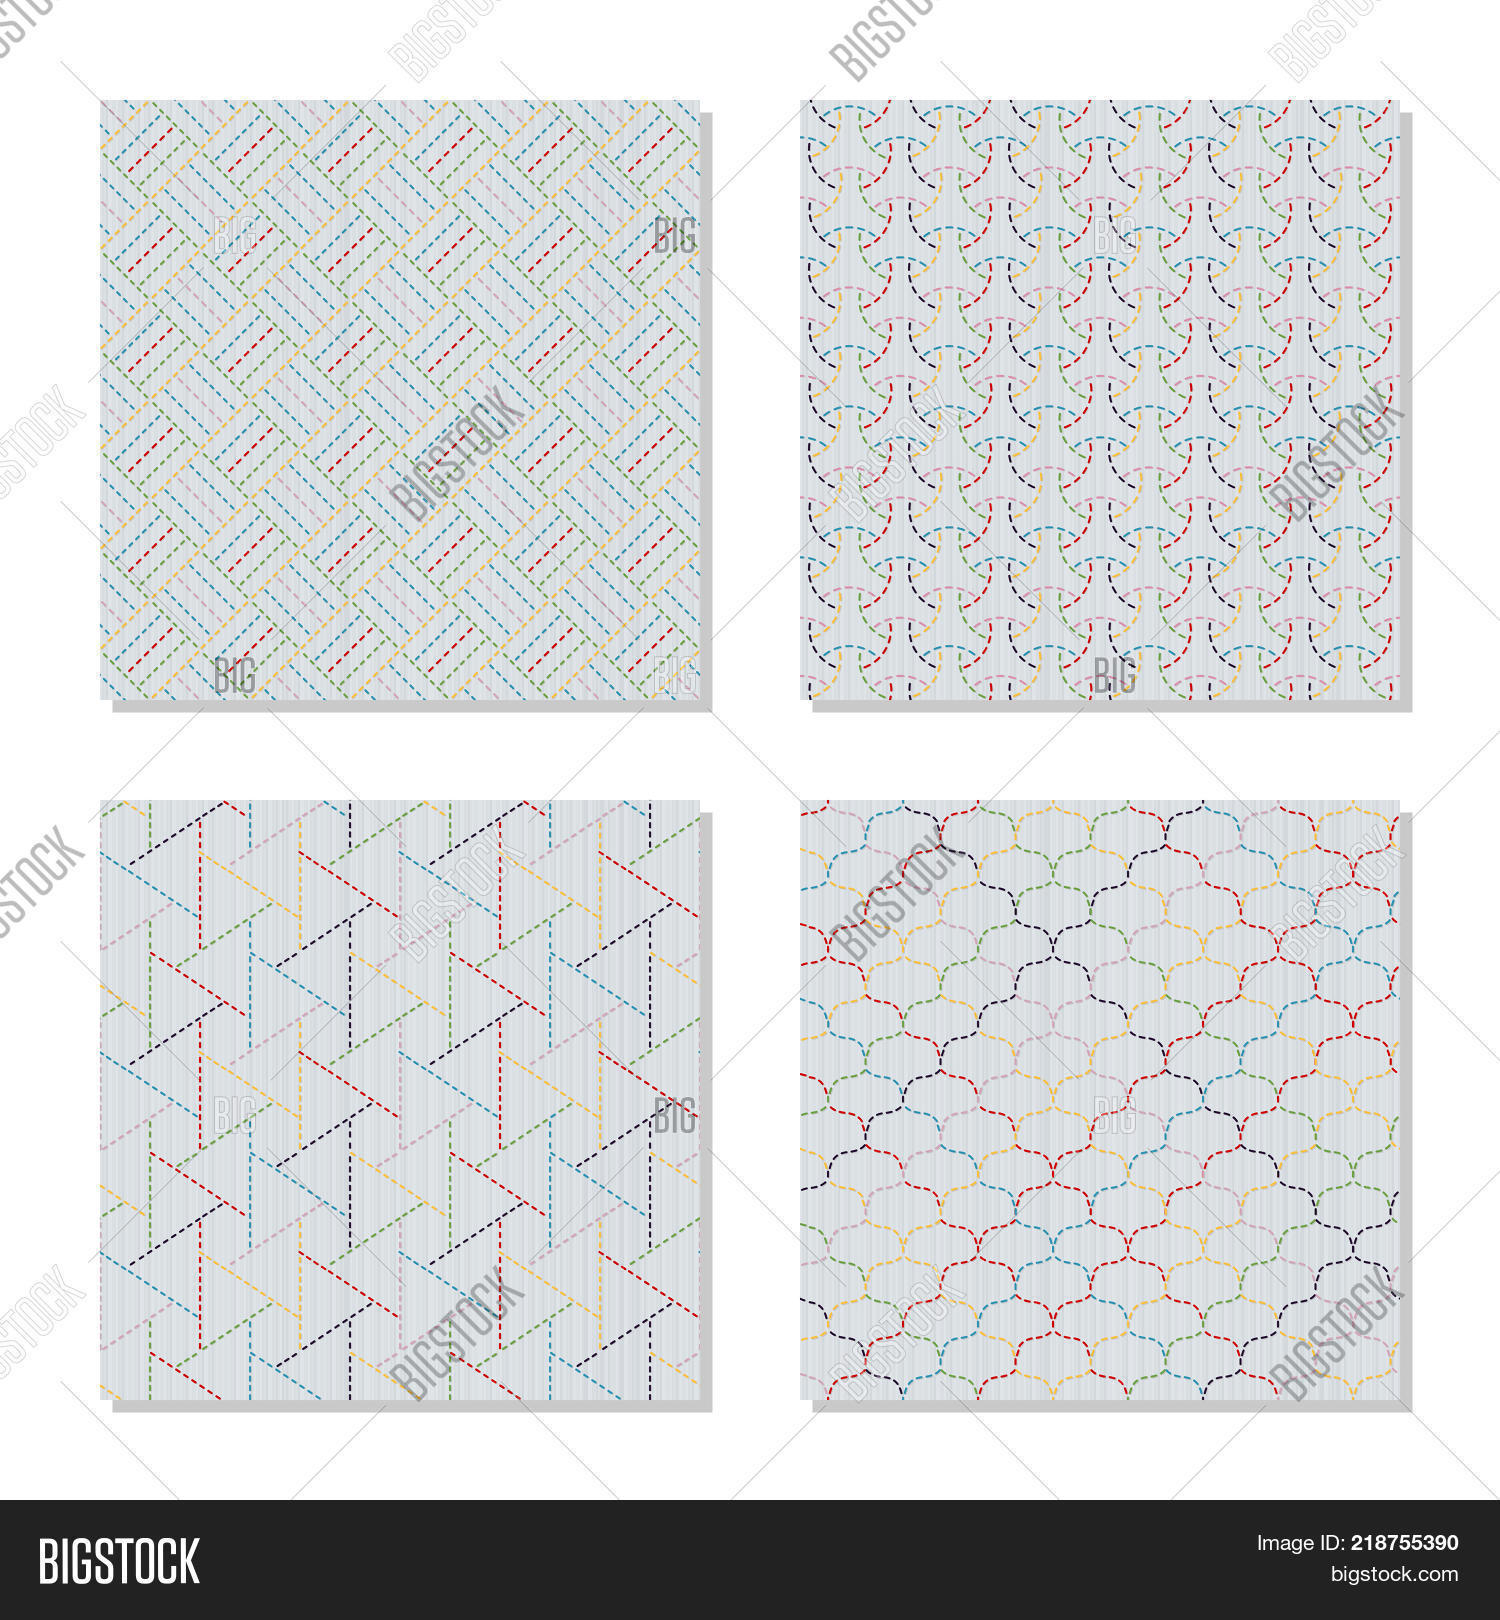 Asian Embroidery Patterns Four Asian Embroidery Vector Photo Free Trial Bigstock